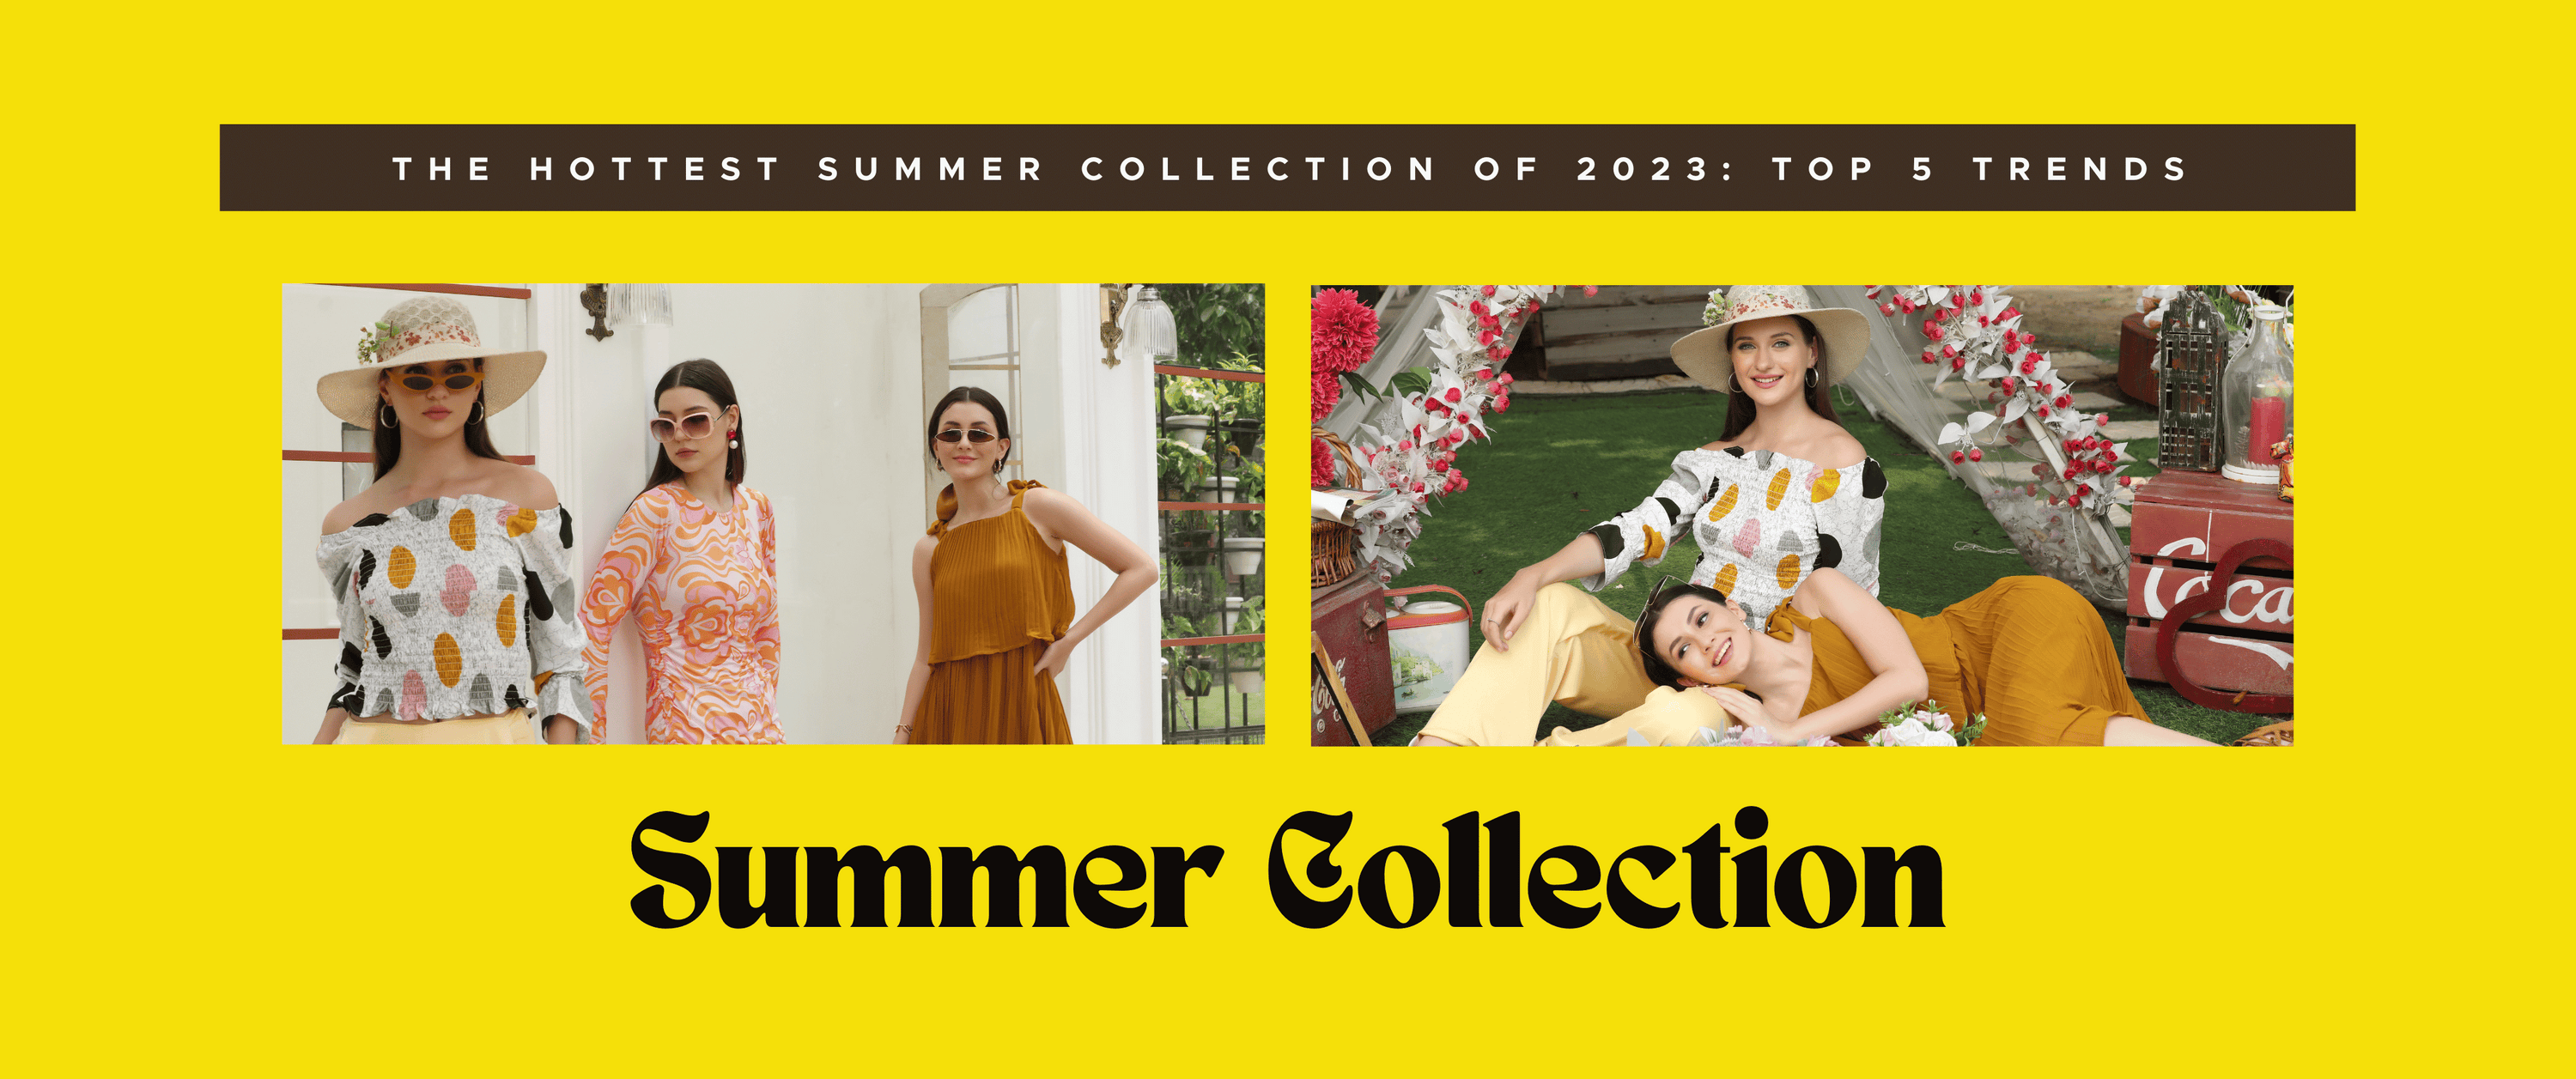 The Hottest Summer Collection of 2023: Top 5 Trends